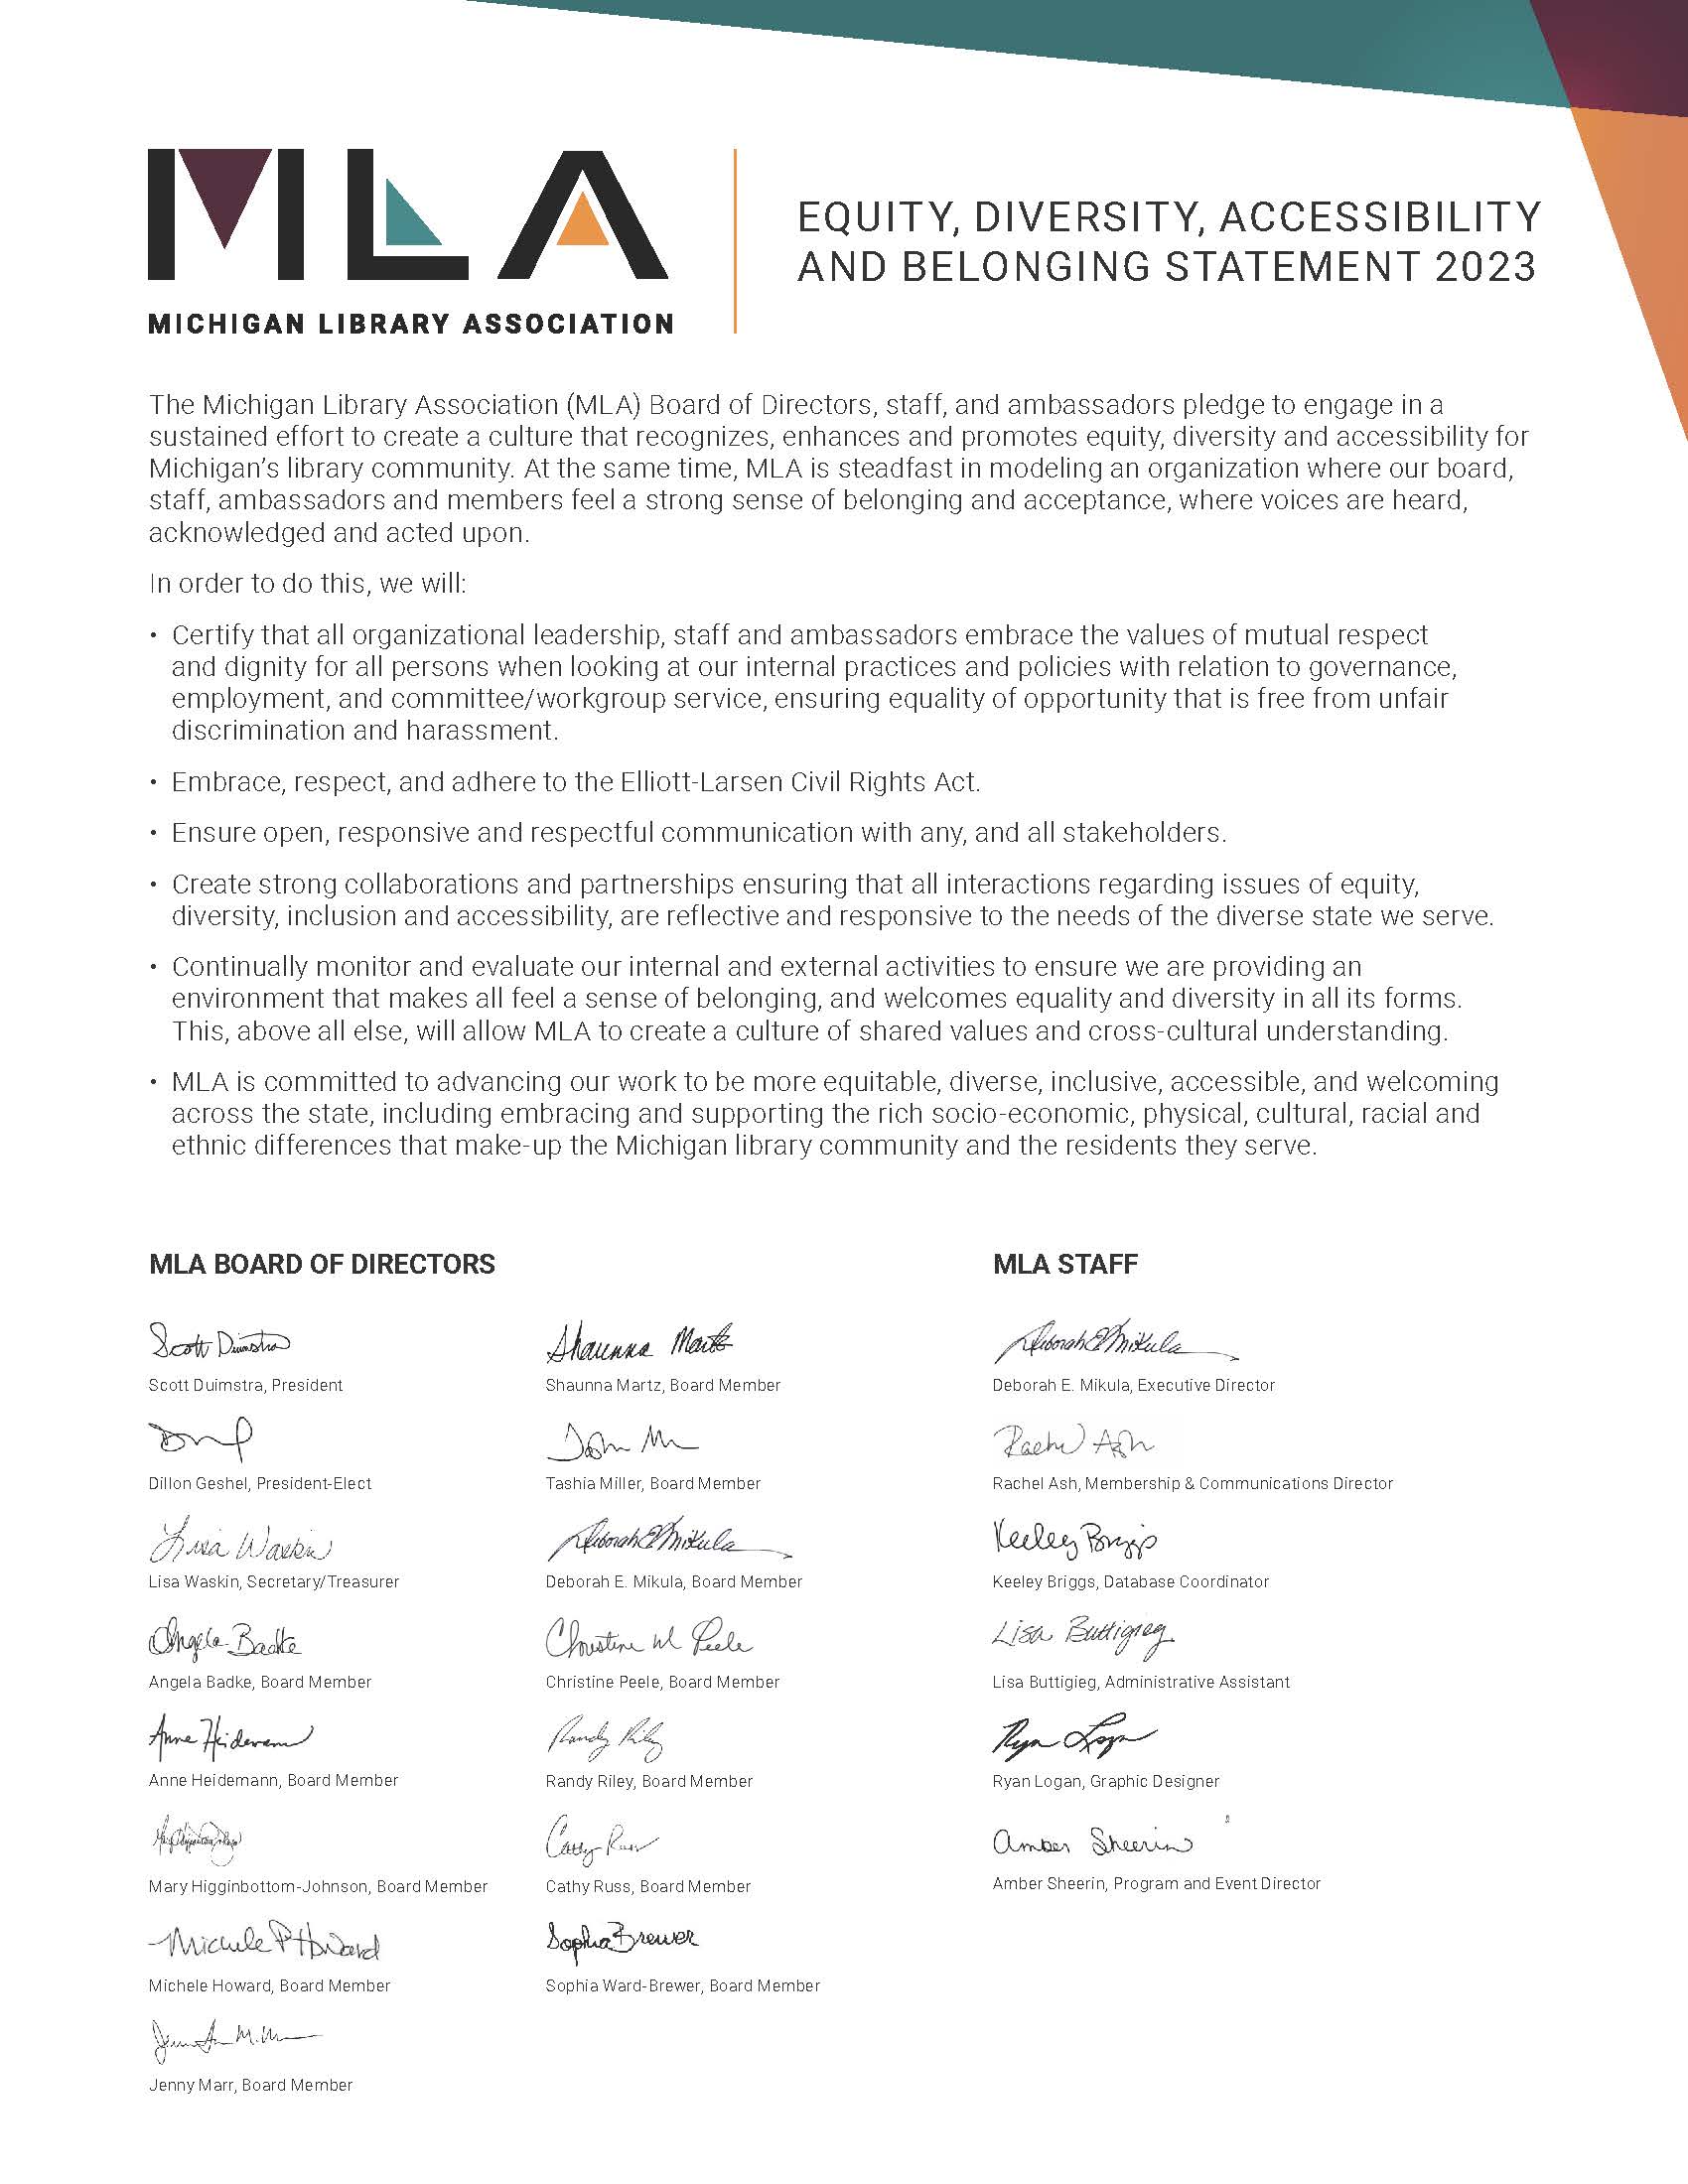 Image of equity, diversity, inclusion and belonging statement signed by MLA 2023 Board and staff